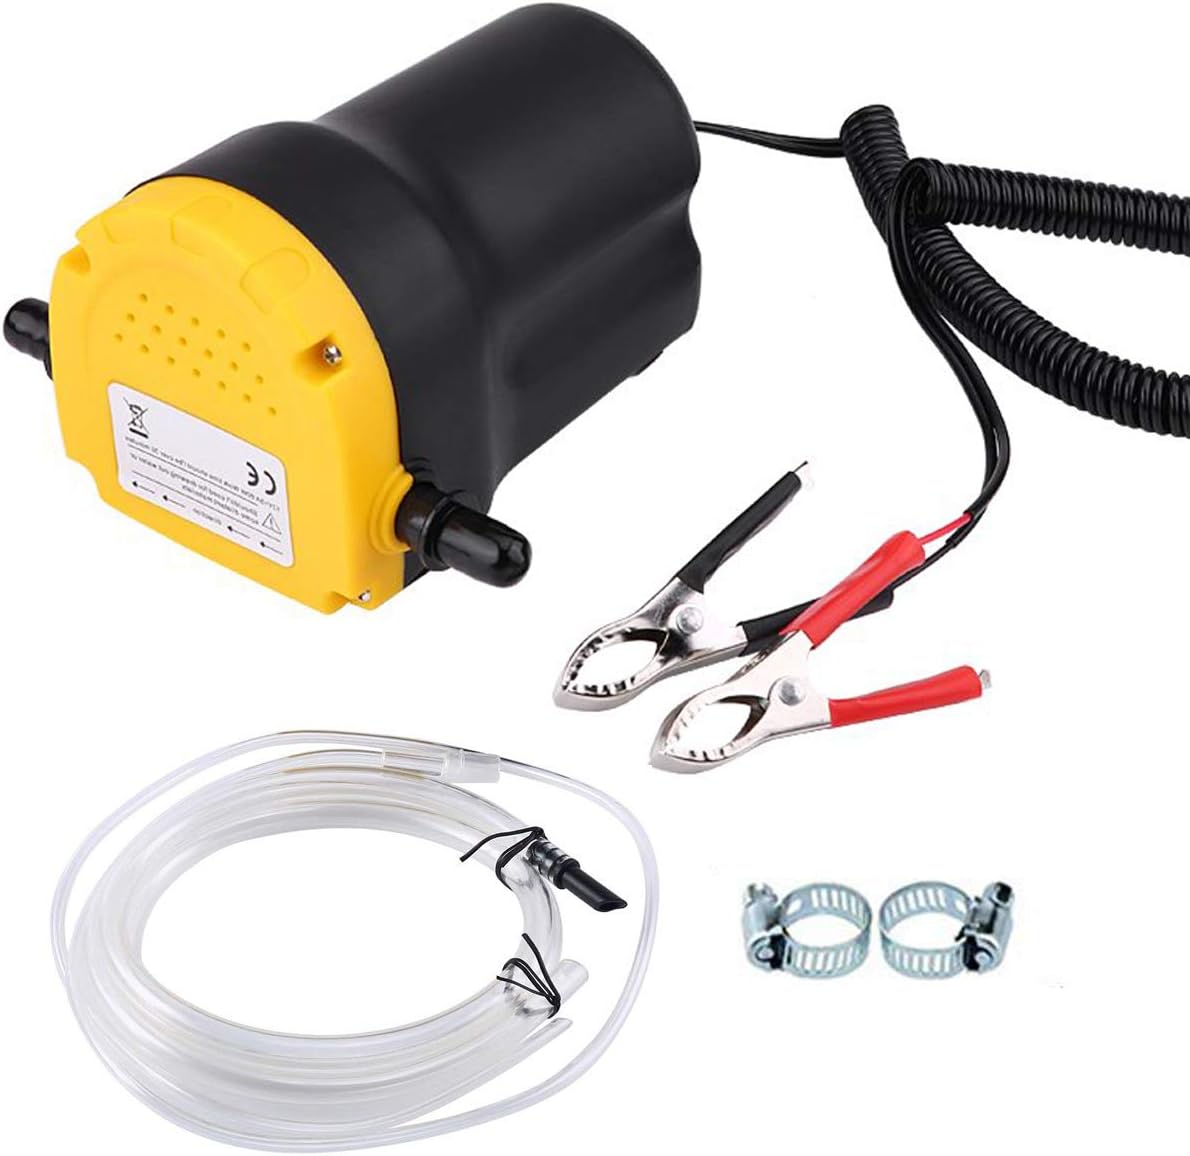 Oil Change Pump Extractor, 12v 60w Oil Extractor P...